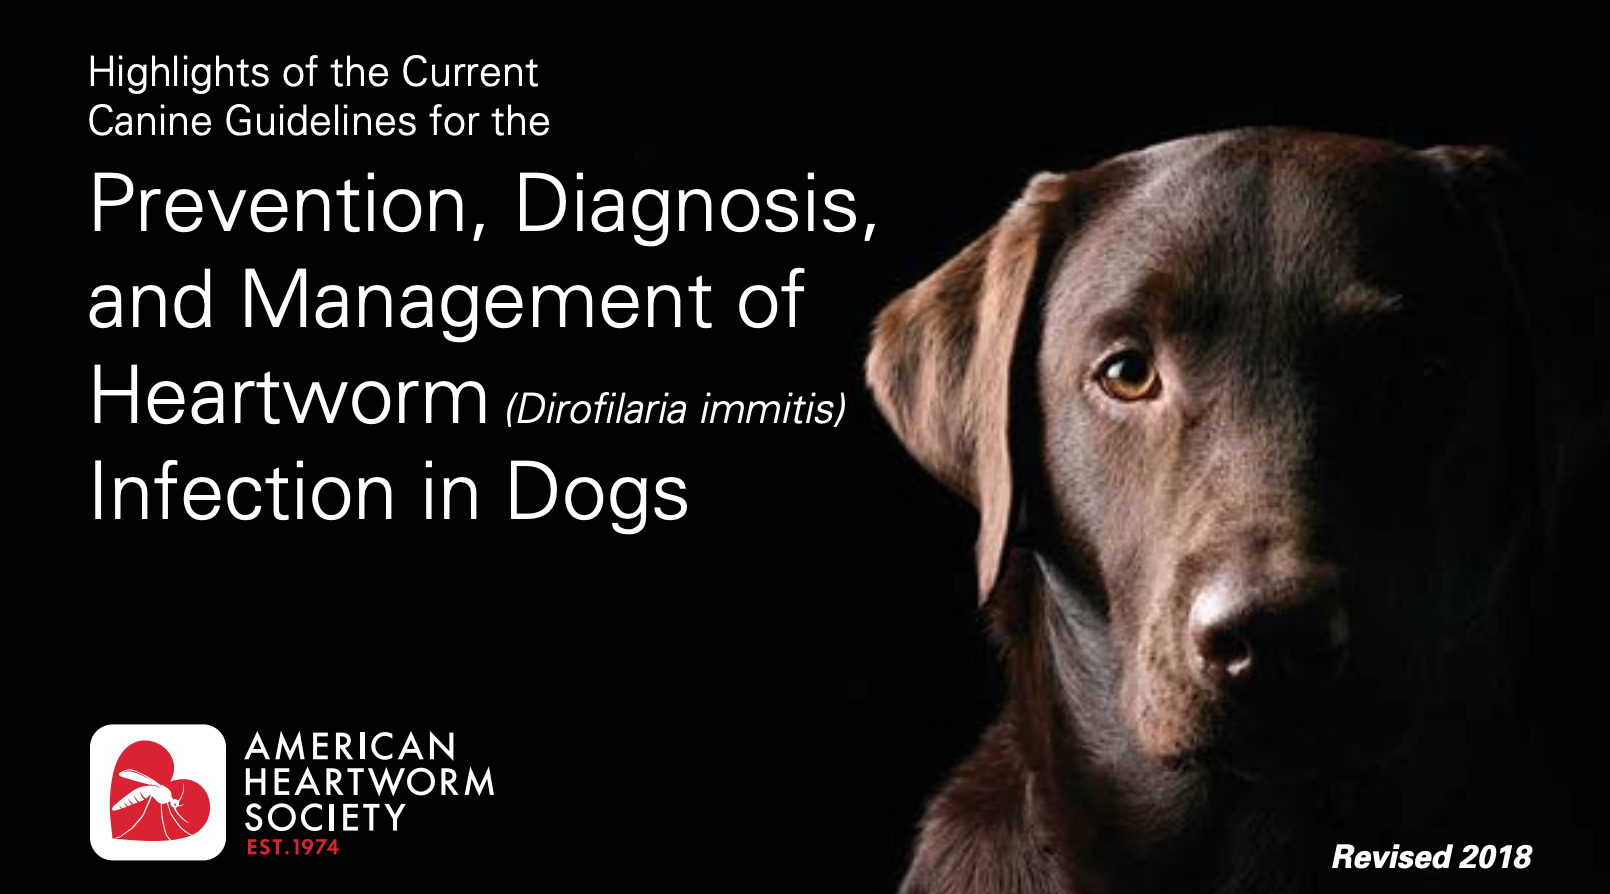 Prevention, Diagnosis, and Management of Heartworm(Dirofilaria immitis) Infection in Dogs